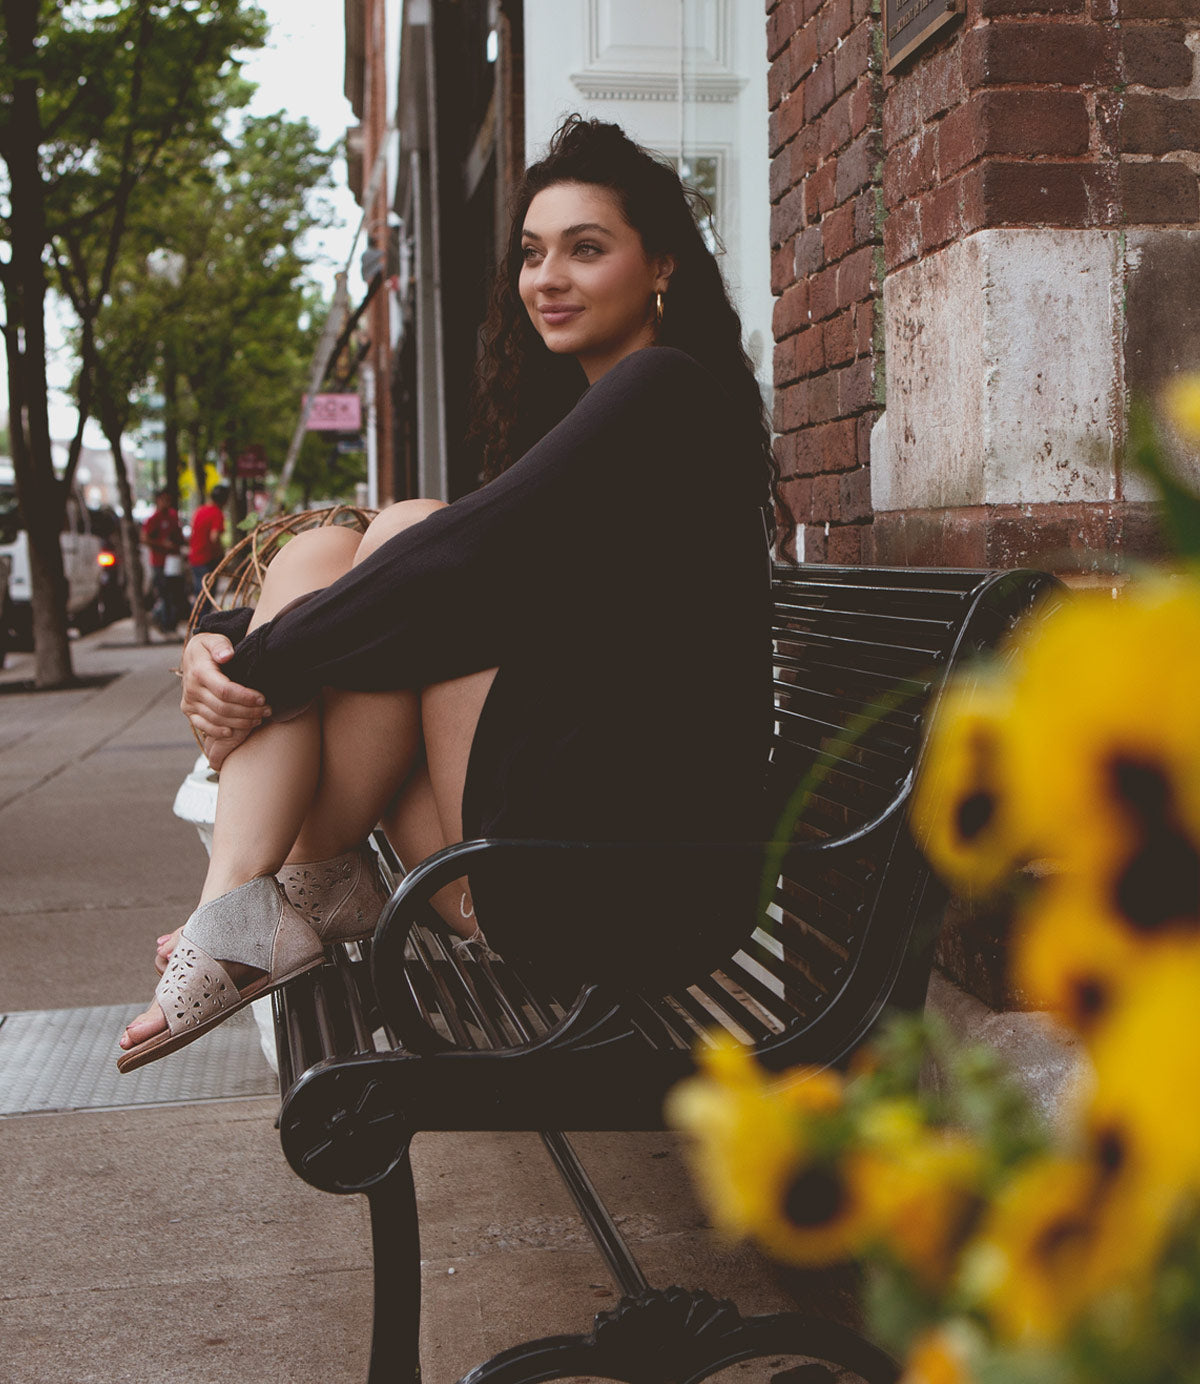 
                  
                    A woman sits on a bench with her arms wrapped around her knees, smiling and looking into the distance. She is wearing a dark sweater and Roan Rotation sandals. Yellow flowers are in the foreground.
                  
                